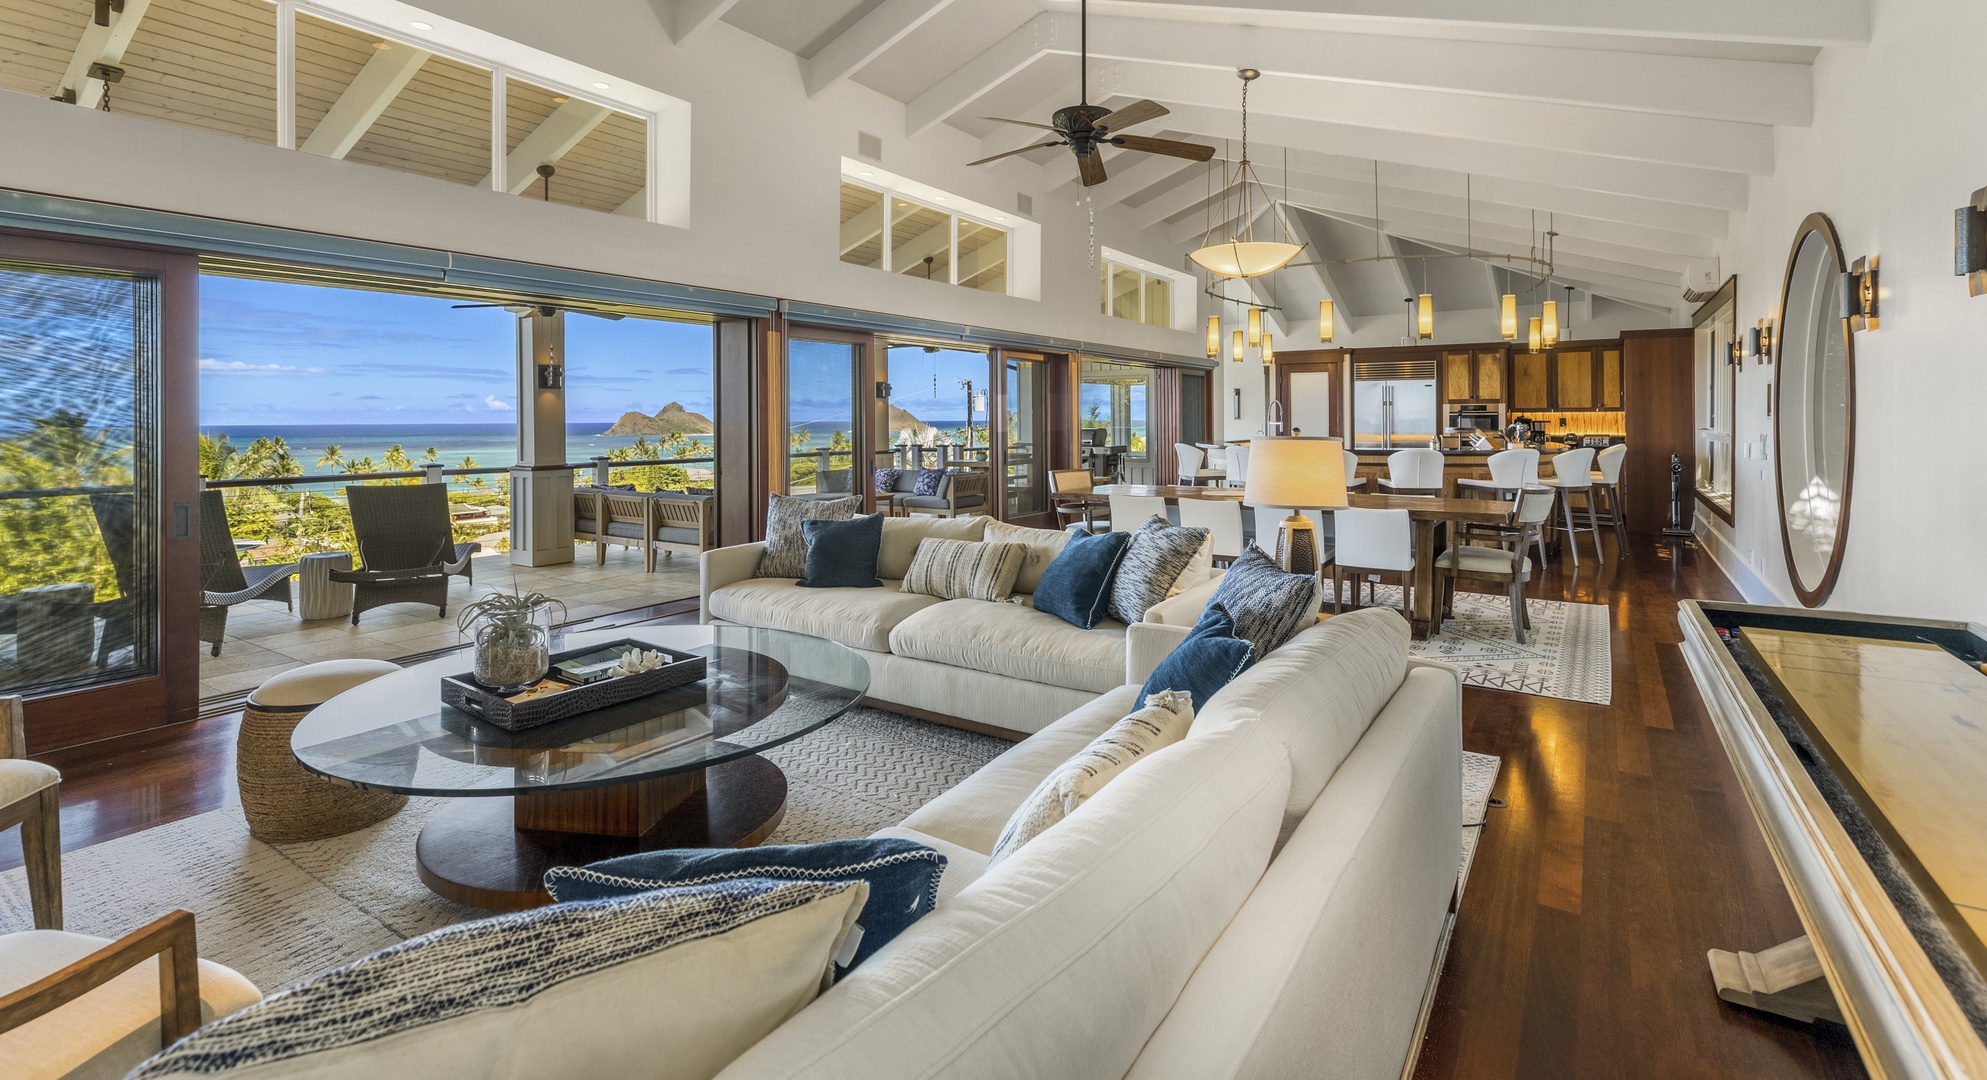 Kailua Vacation Rentals, Lanikai Villa* - The main living area is spacious with a large sectional sofa and gorgeous views through the sliding doors